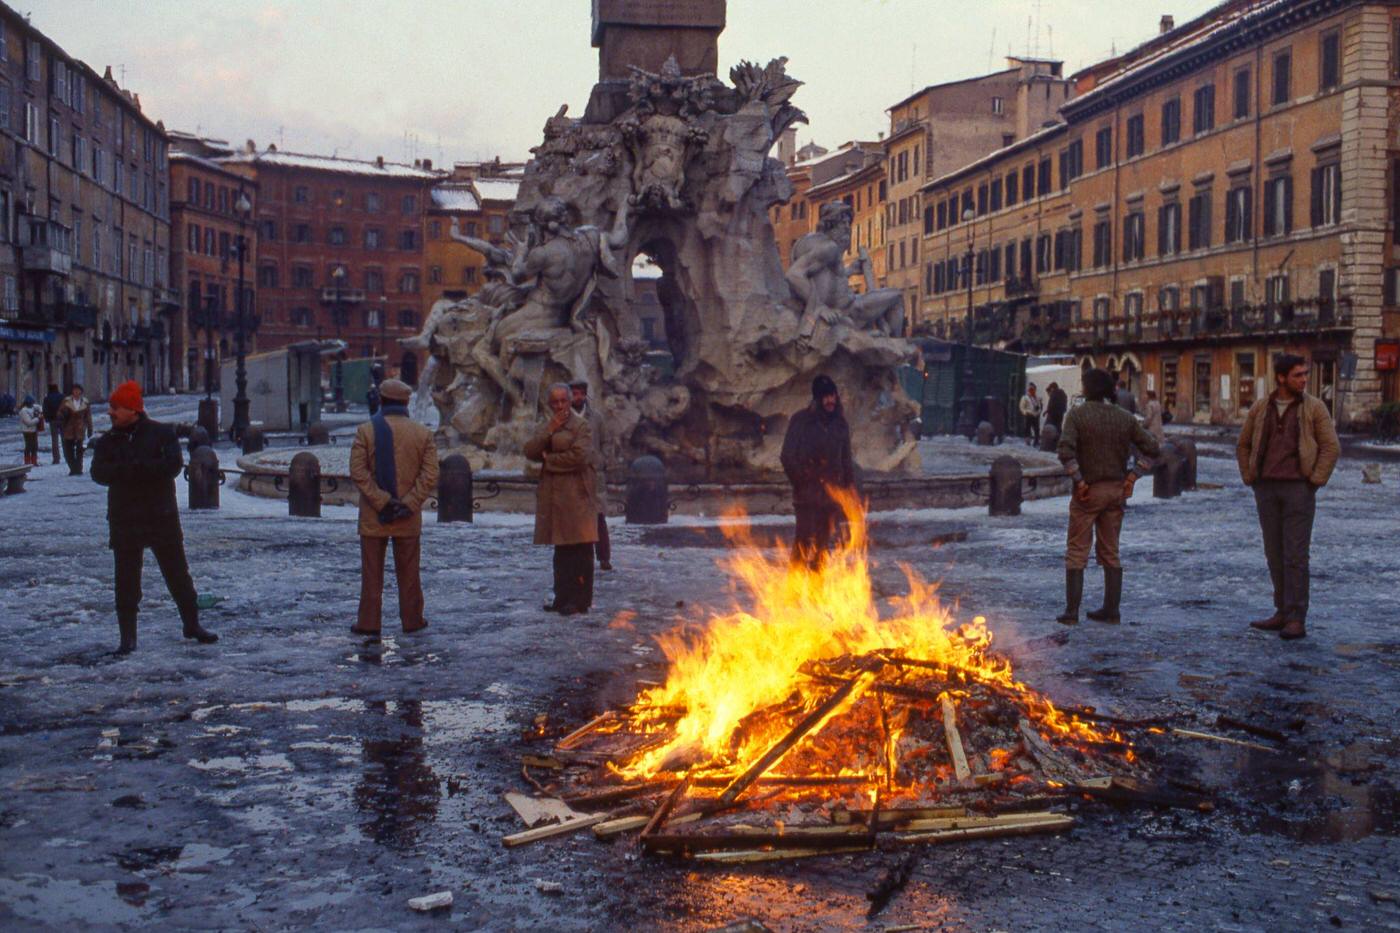 Bonfire After Christmas Market in Piazza Navona, Rome, 1985